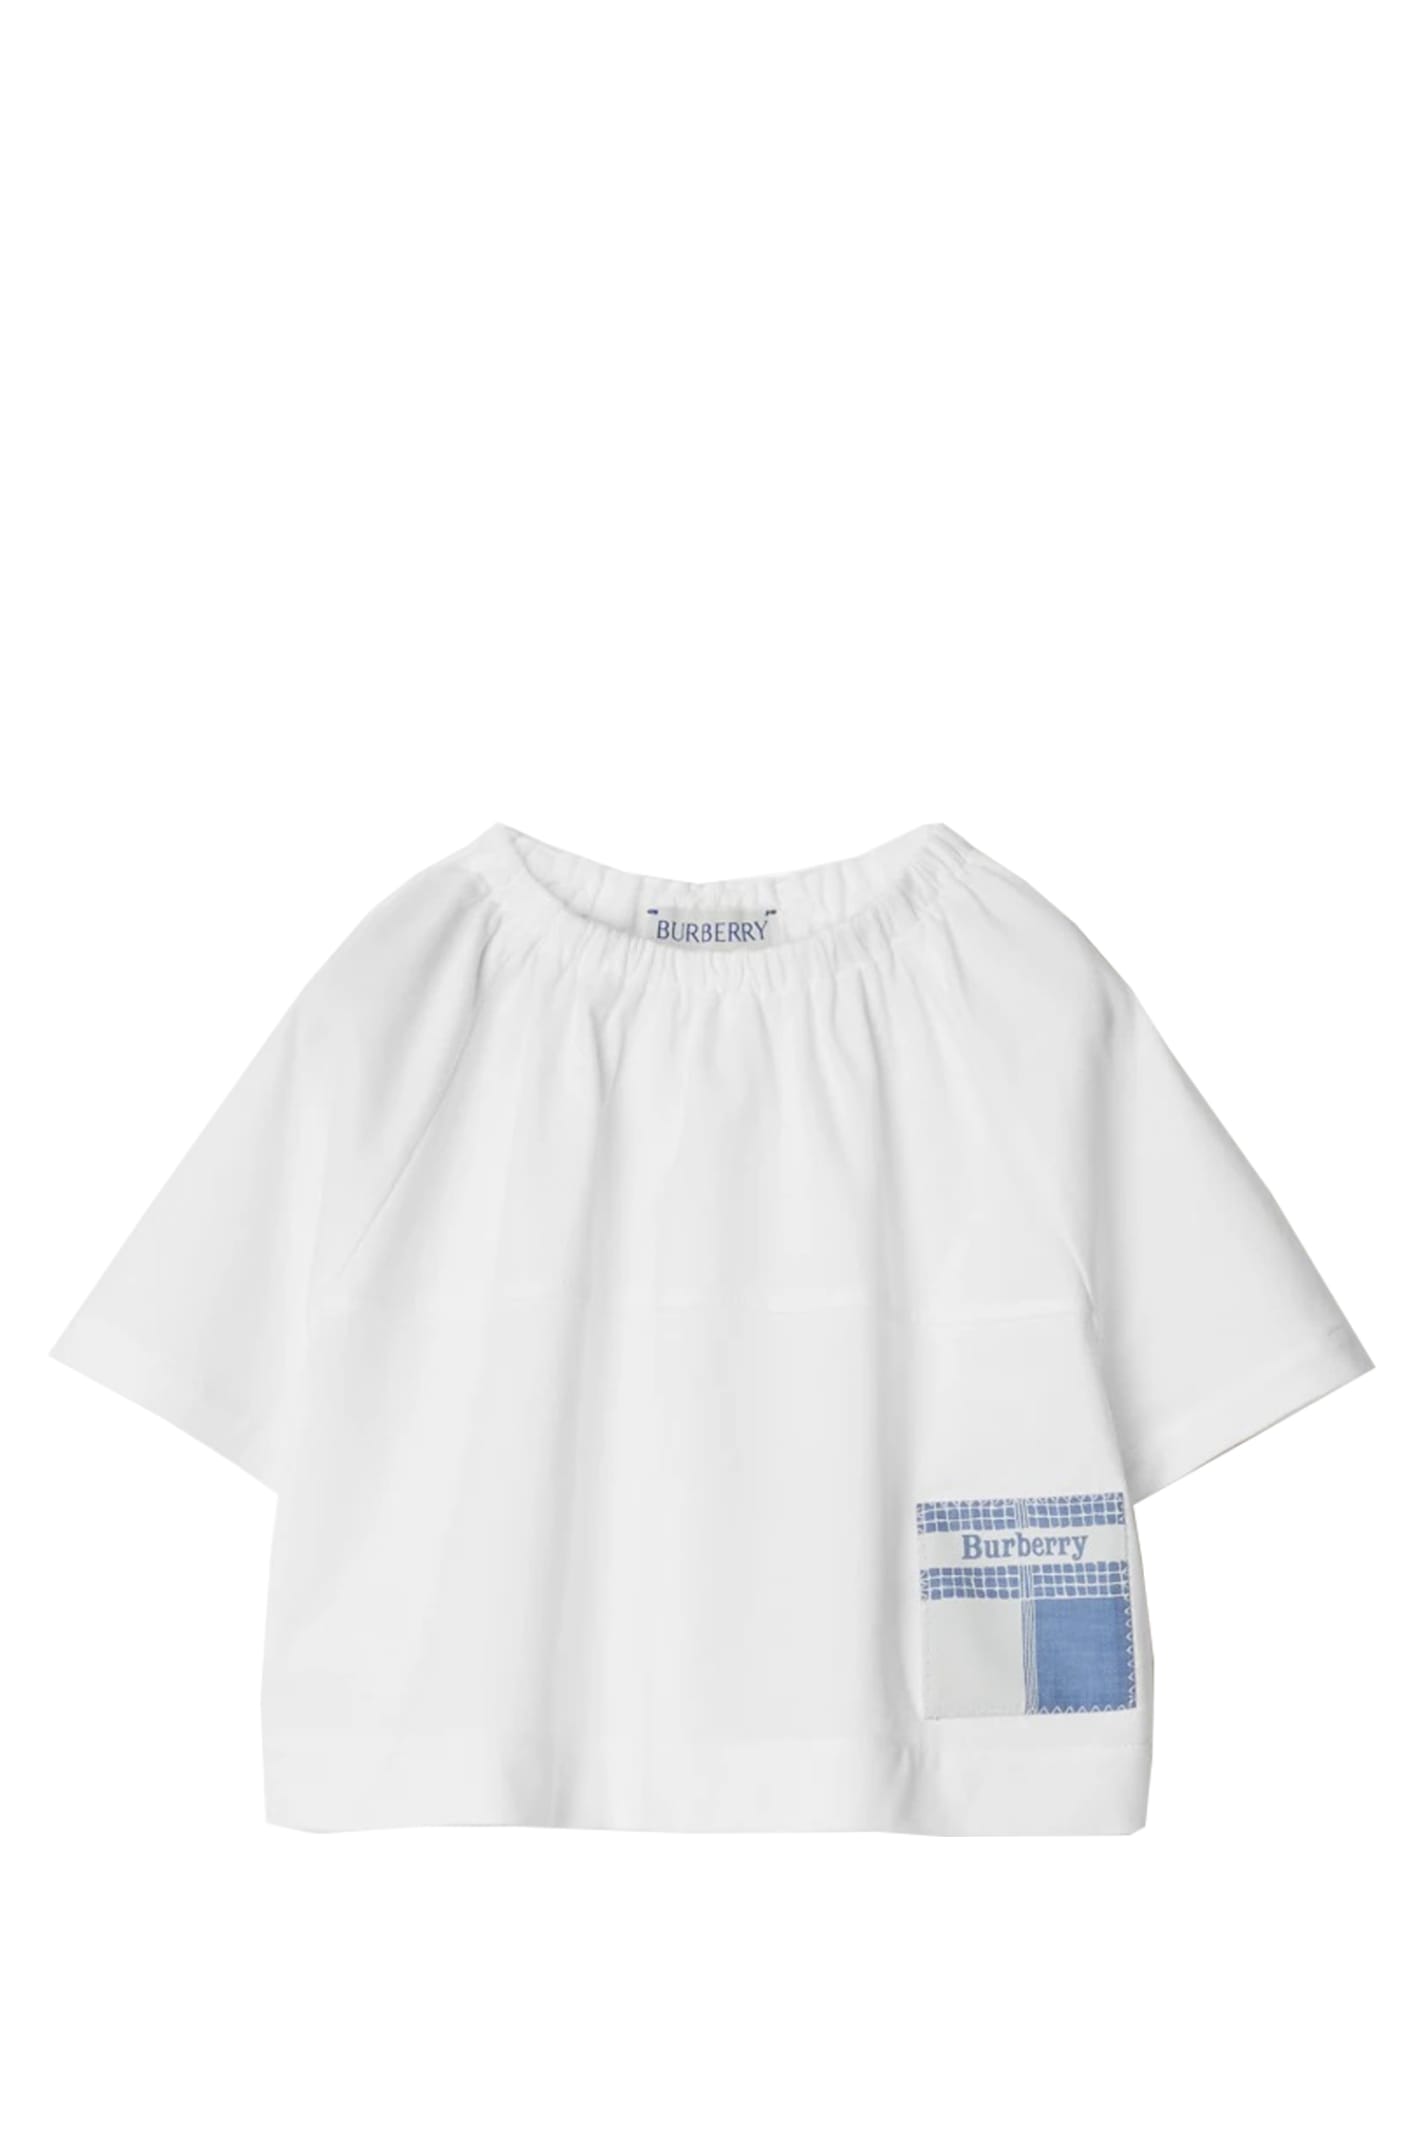 Burberry Kids' Cotton T-shirt In White